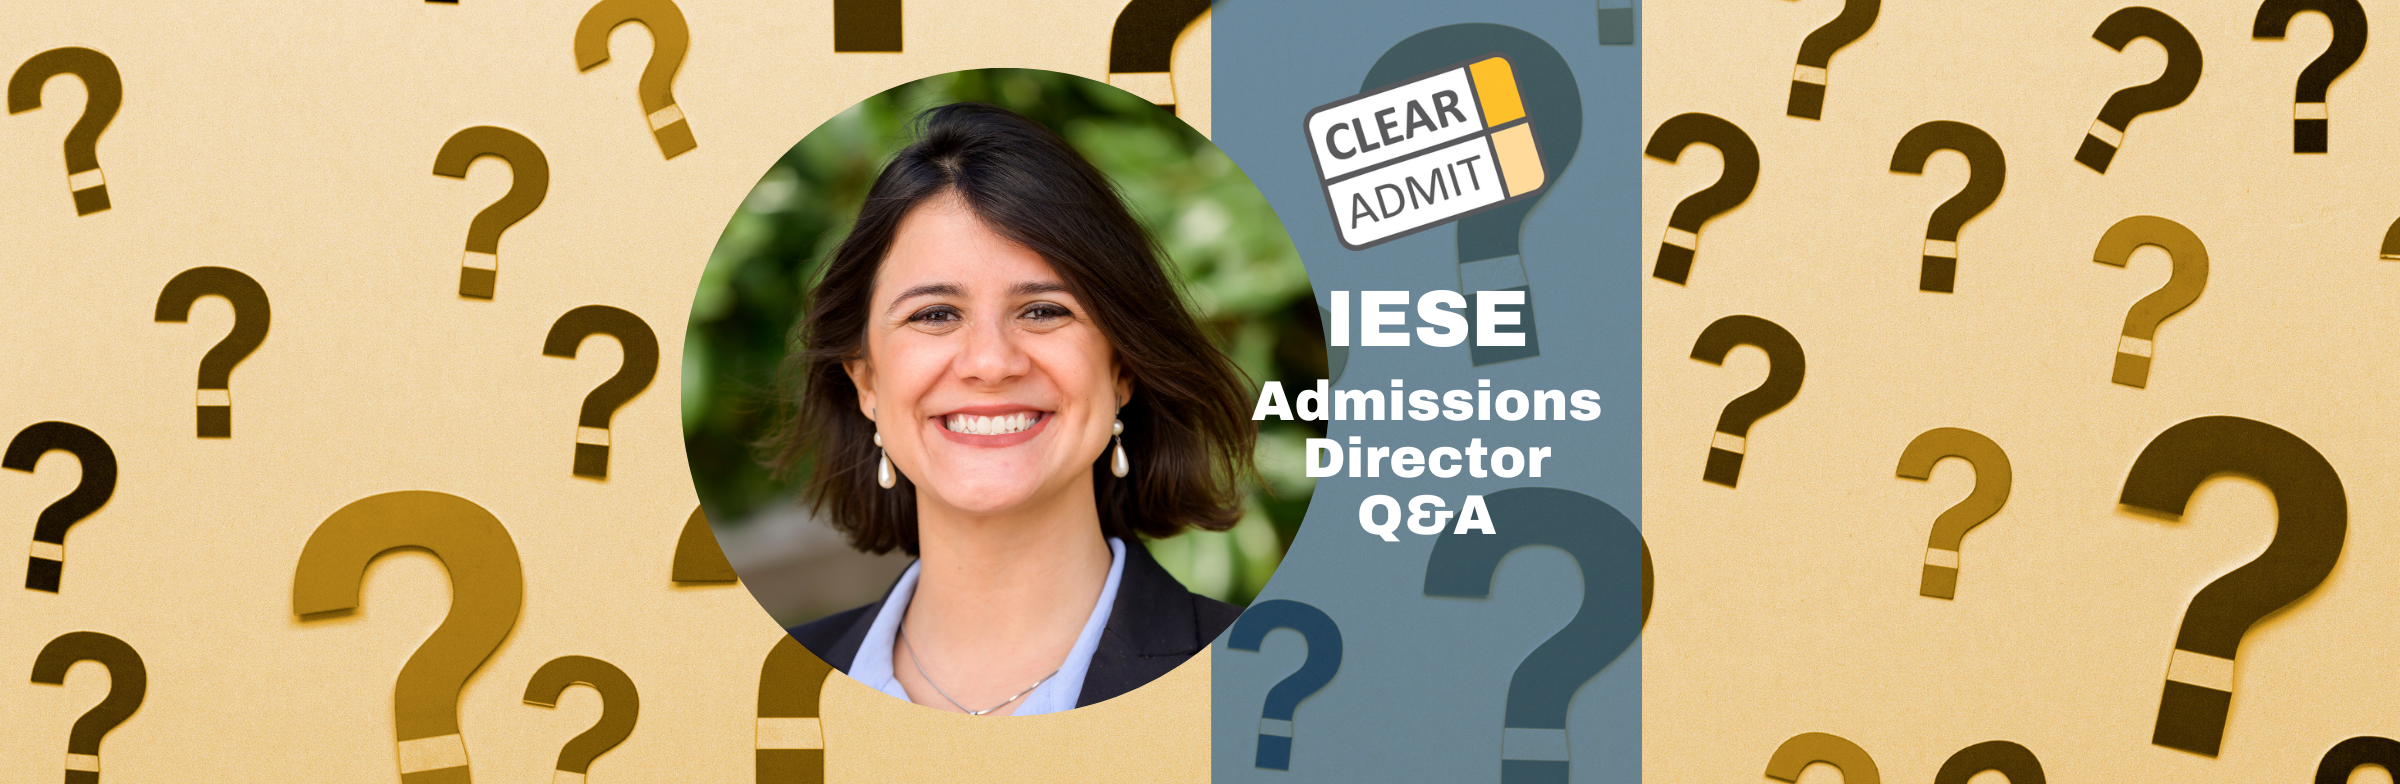 Image for Admissions Director Q&A: Paula Amorim of IESE